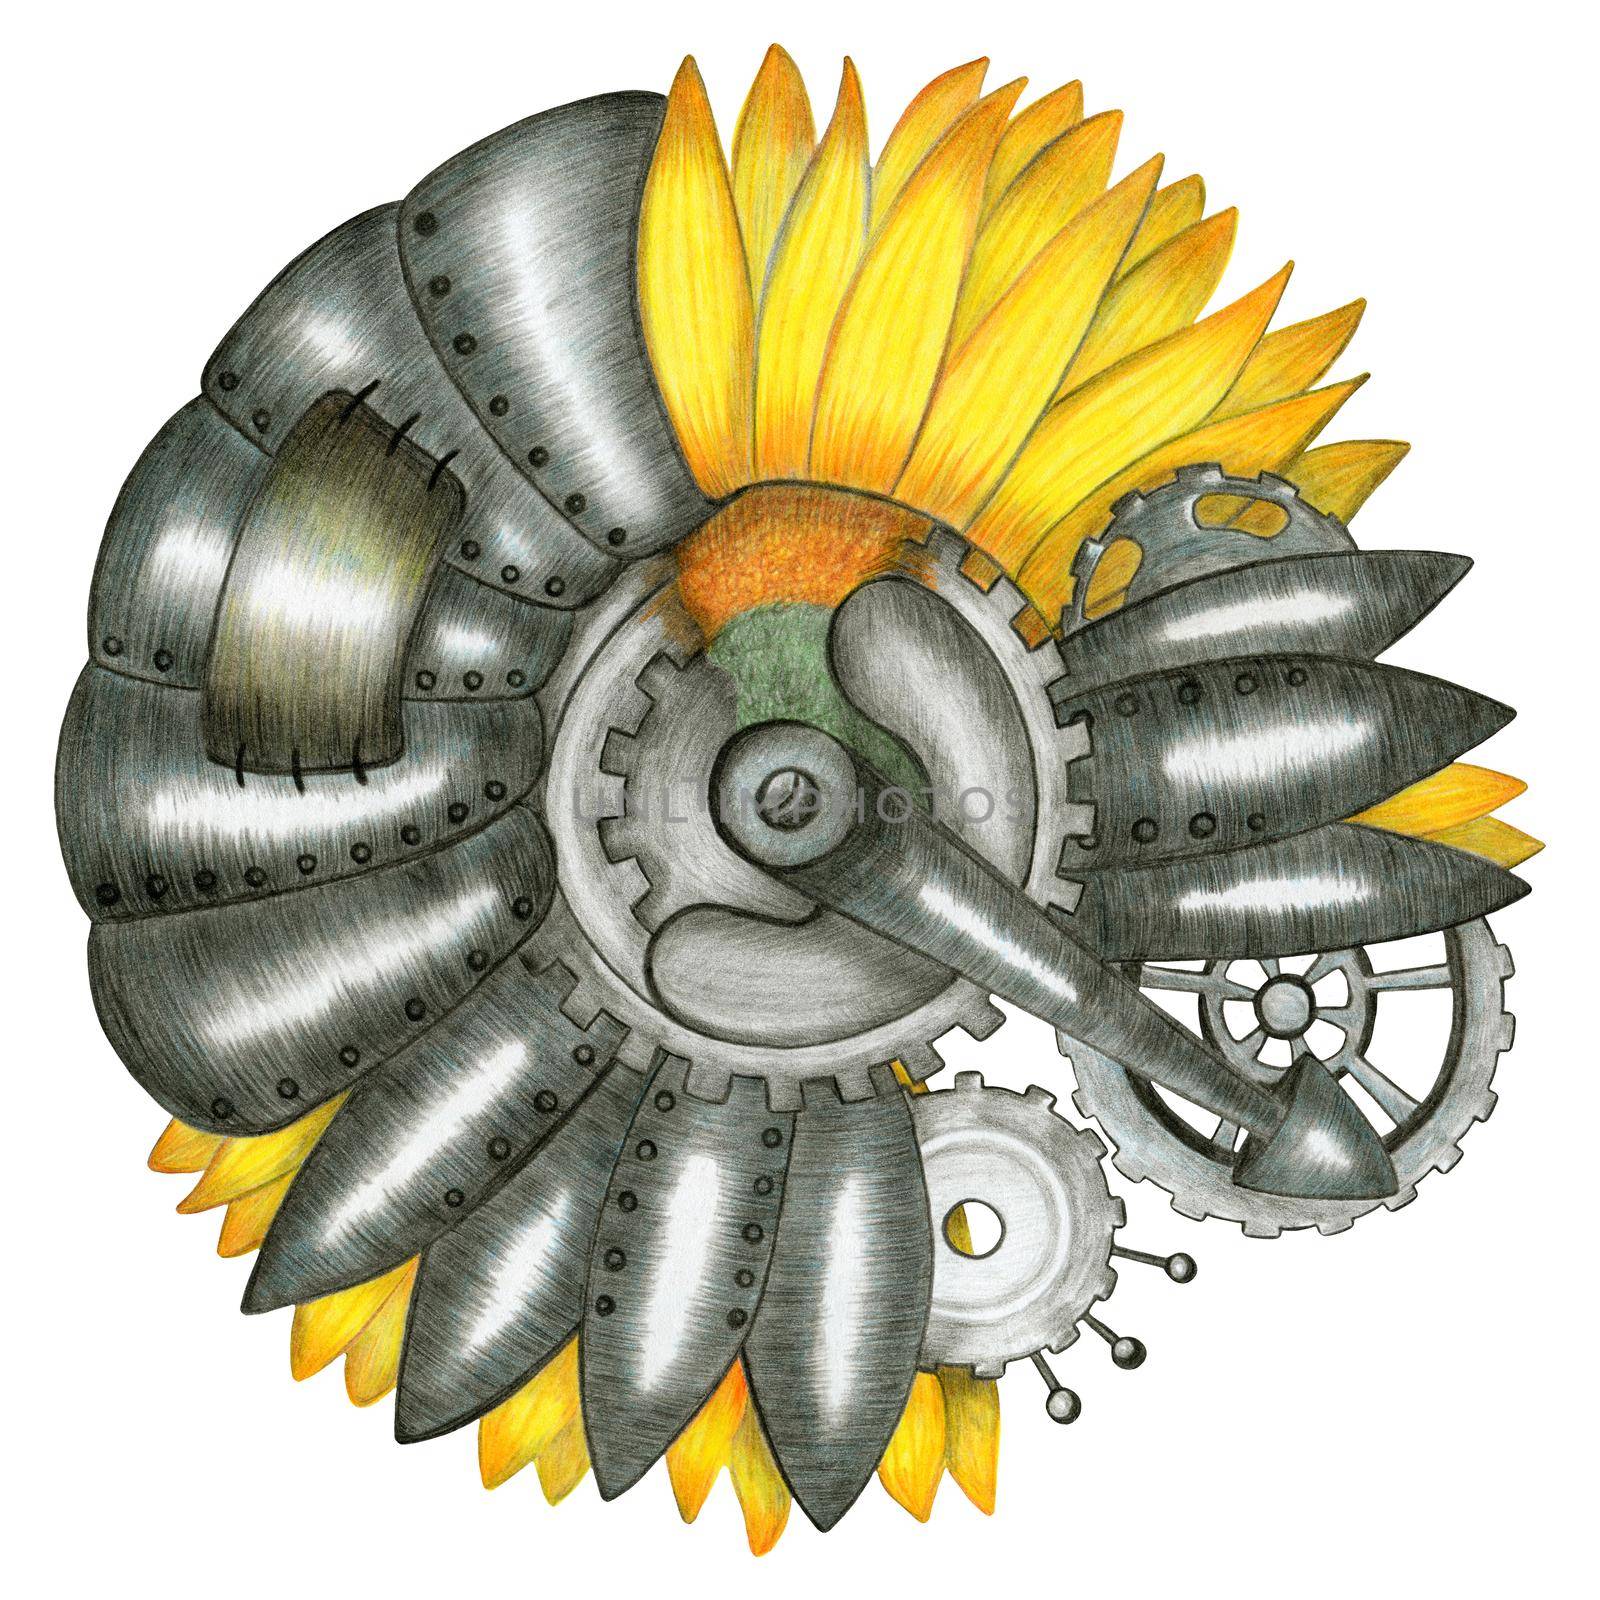 Design Element Hand Drawn Illustration of Colorful Steampunk Sunflower on White Background. Steampunk Sunflower Drawn by Pencil.